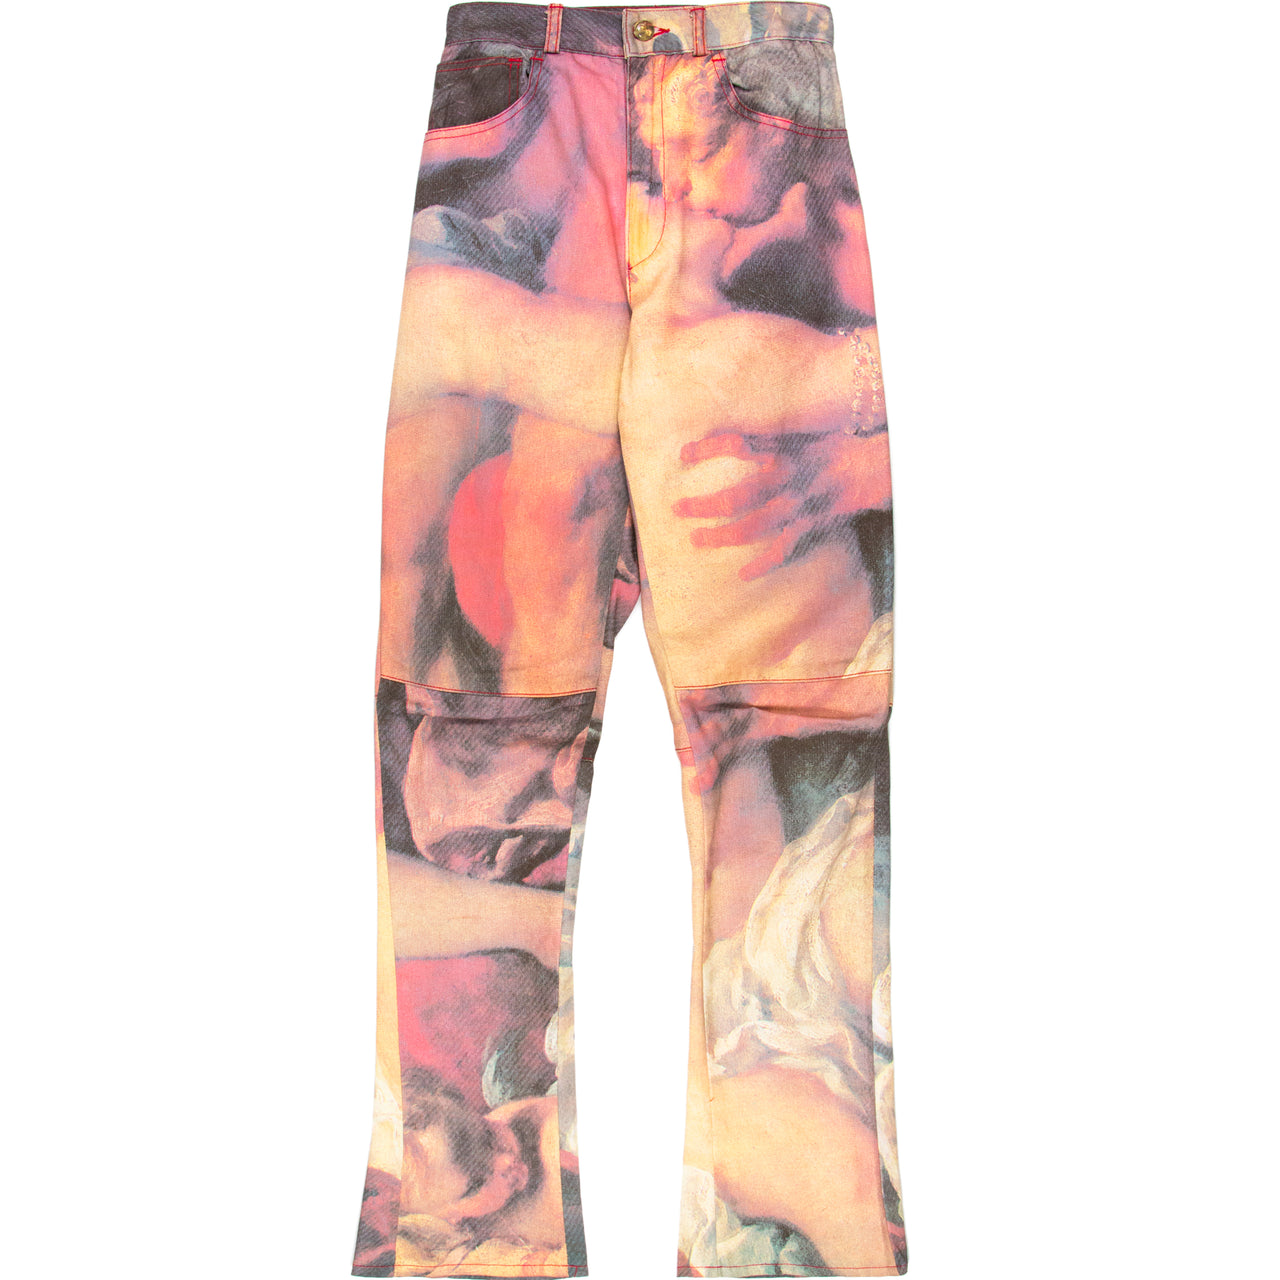 Vivienne Westwood "Hercules and Omphale" Jeans - AW93 “Anglomania”